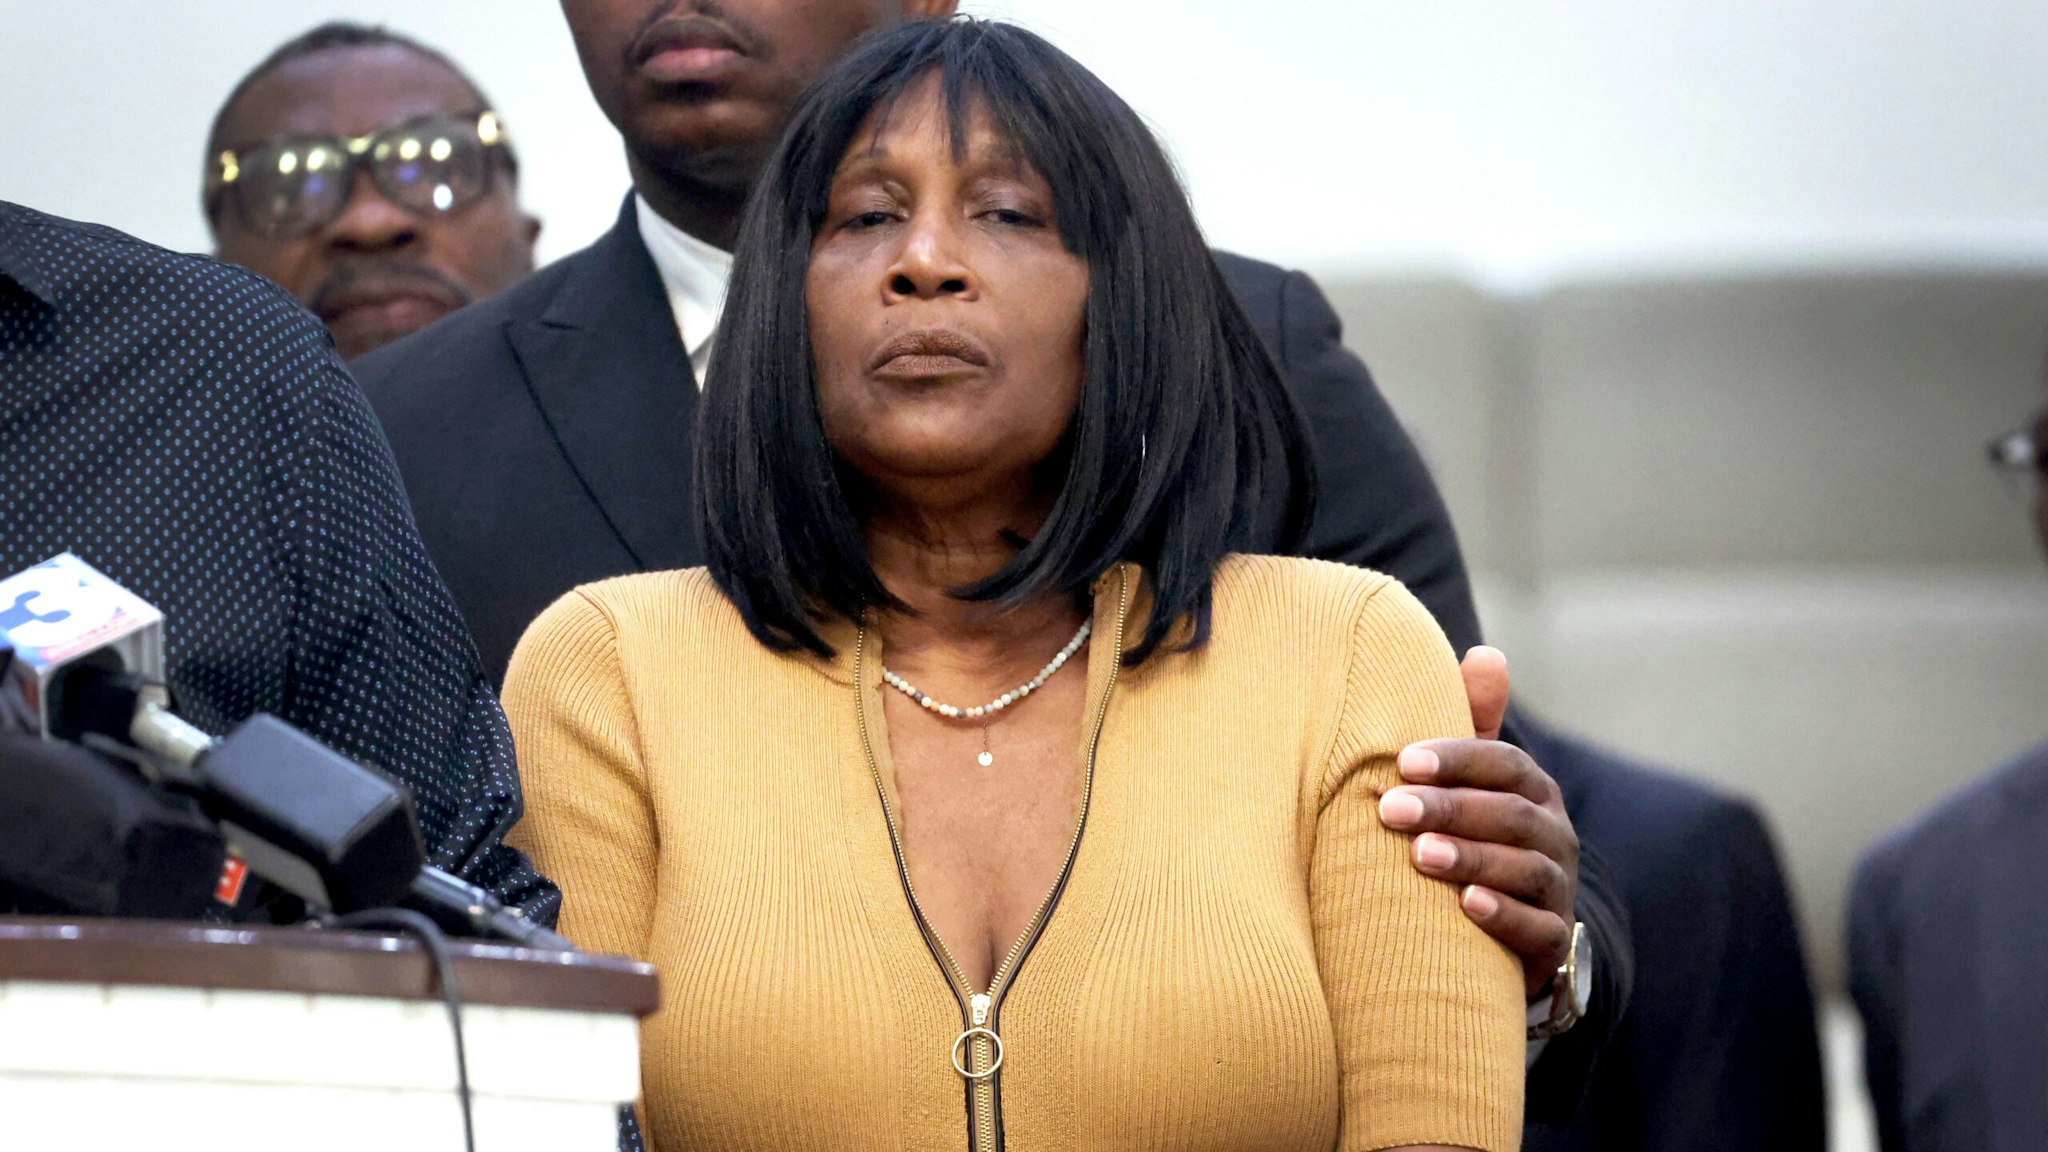 MEMPHIS, TENNESSEE - JANUARY 27: RowVaughn Wells, mother of Tyre Nichols, is comforted during a press conference on January 27, 2023 in Memphis, Tennessee. Tyre Nichols, a 29-year-old Black man, died three days after being severely beaten by five Memphis Police Department officers during a traffic stop on January 7, 2023. Memphis and cities across the country are bracing for potential unrest when the city releases video footage from the beating to the public later this evening.